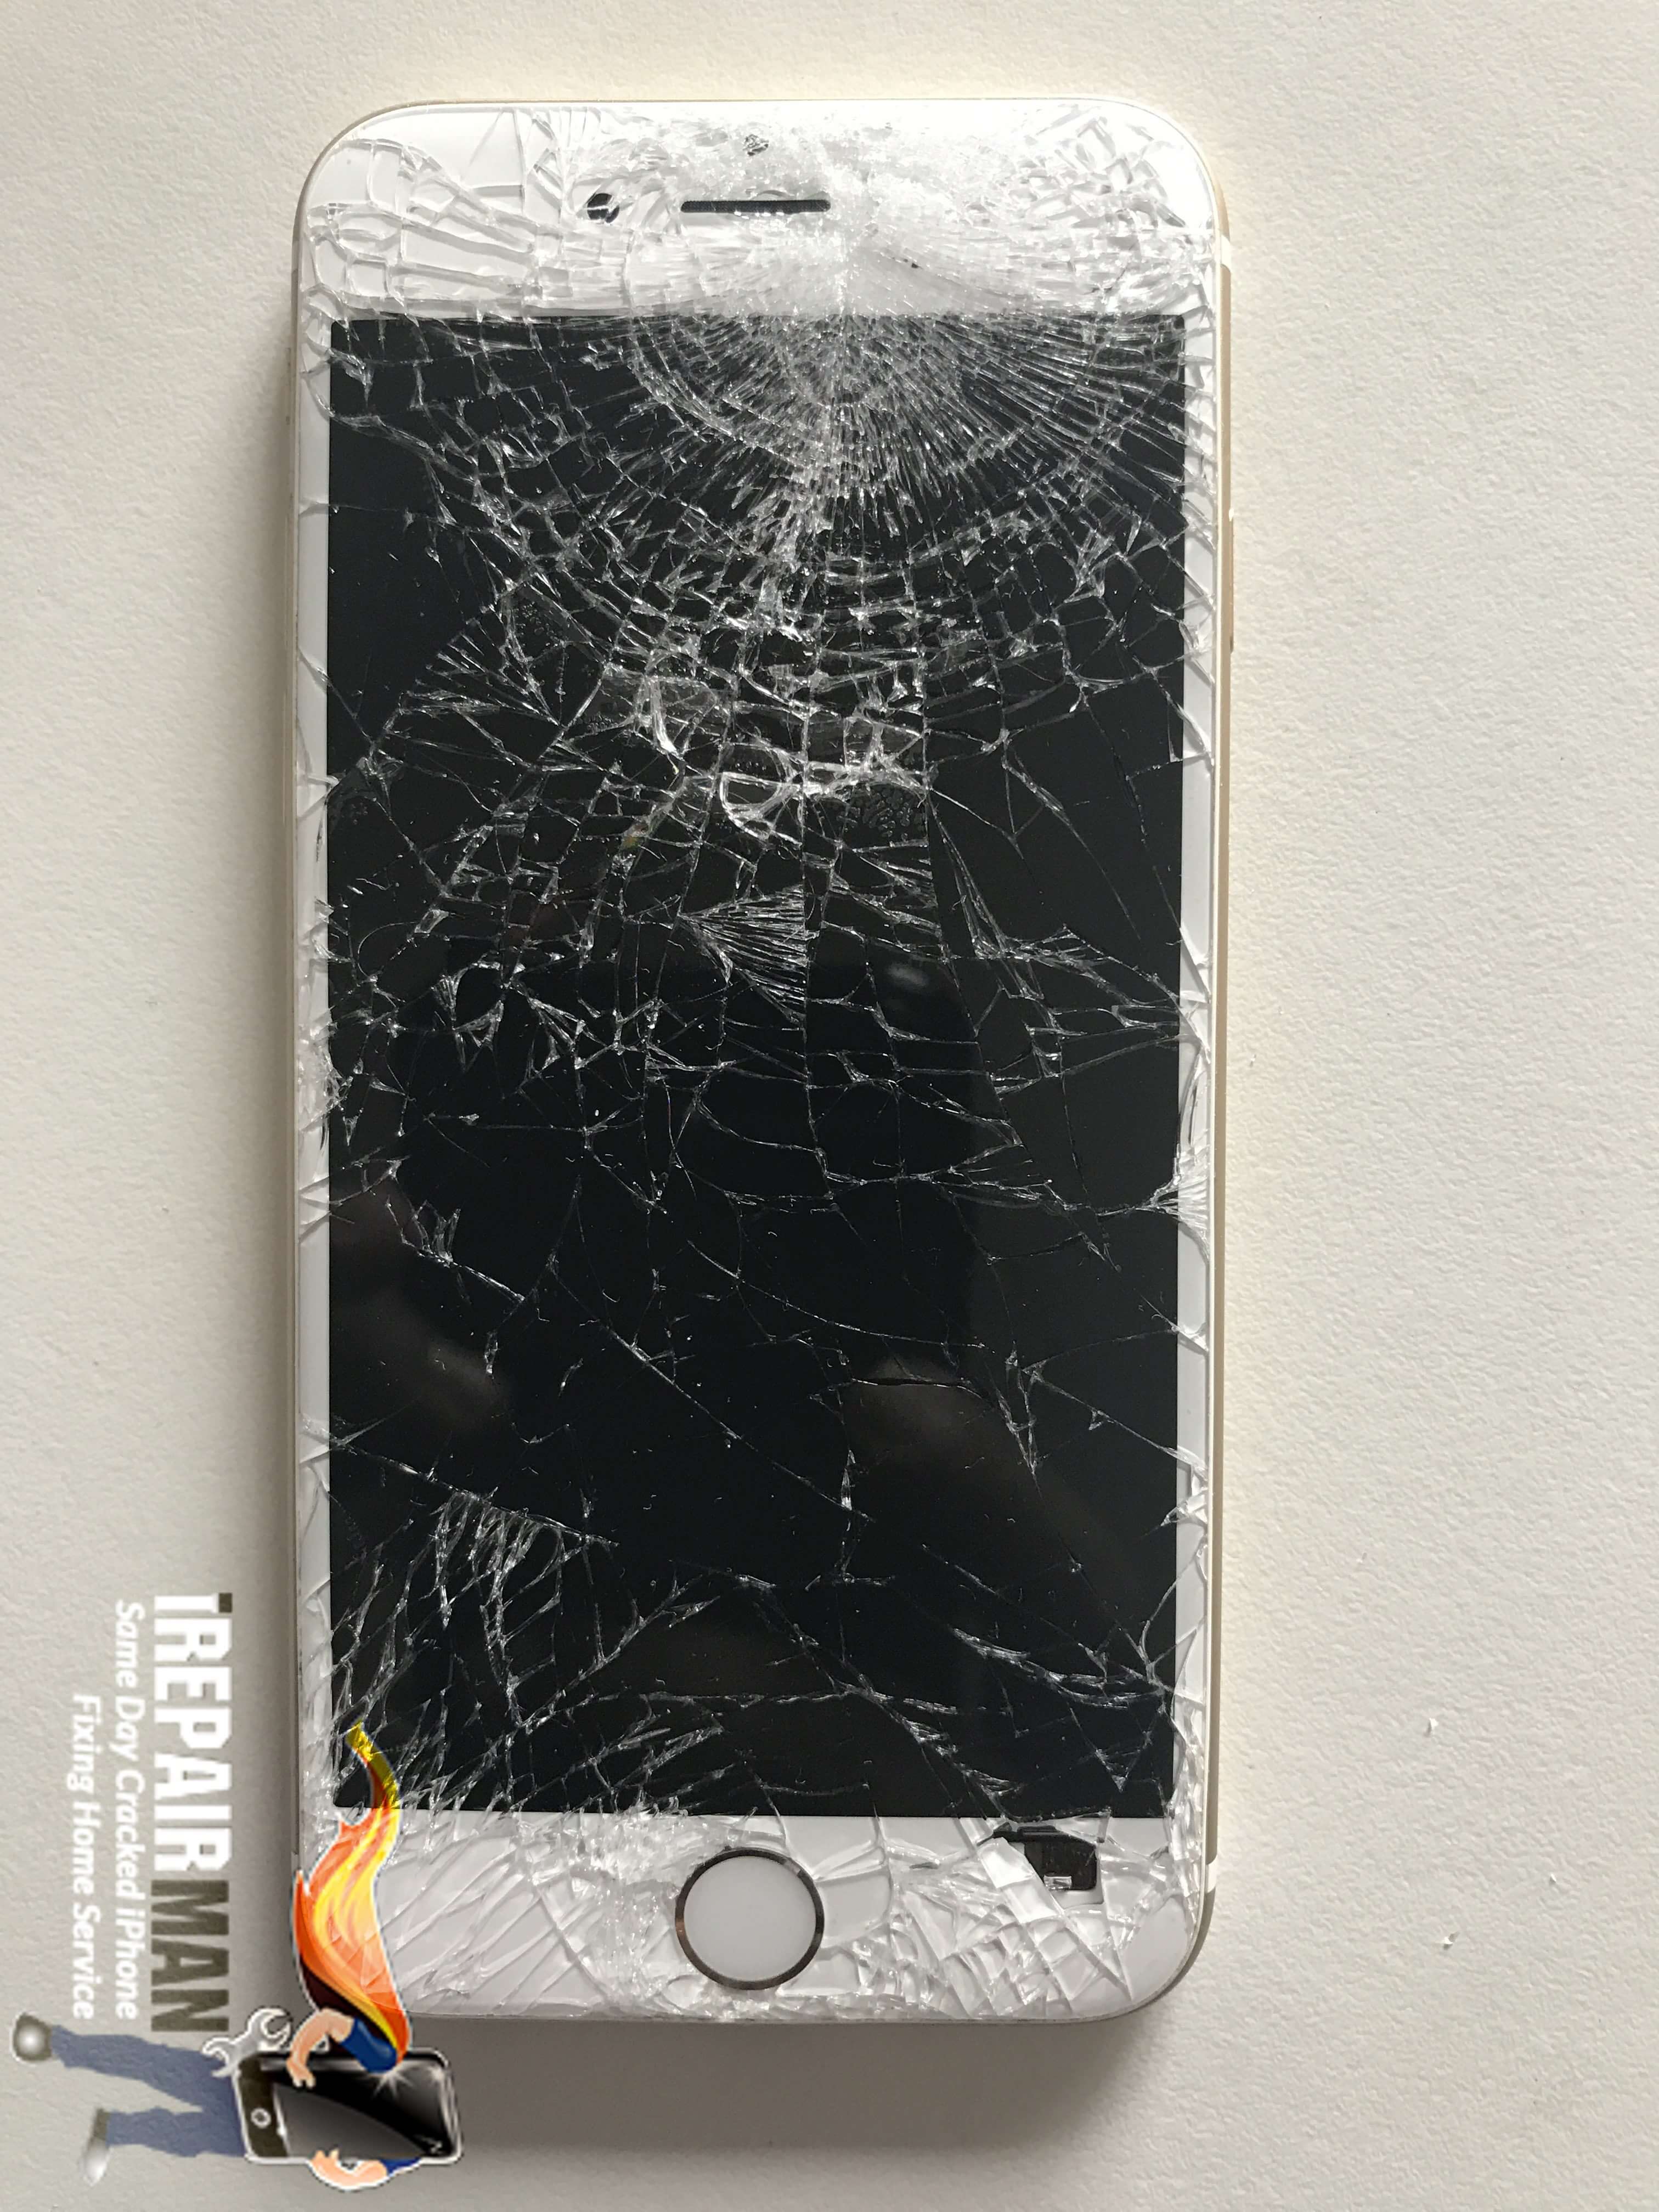 smashed screen repair of iPhone 6s Plus Gold in London